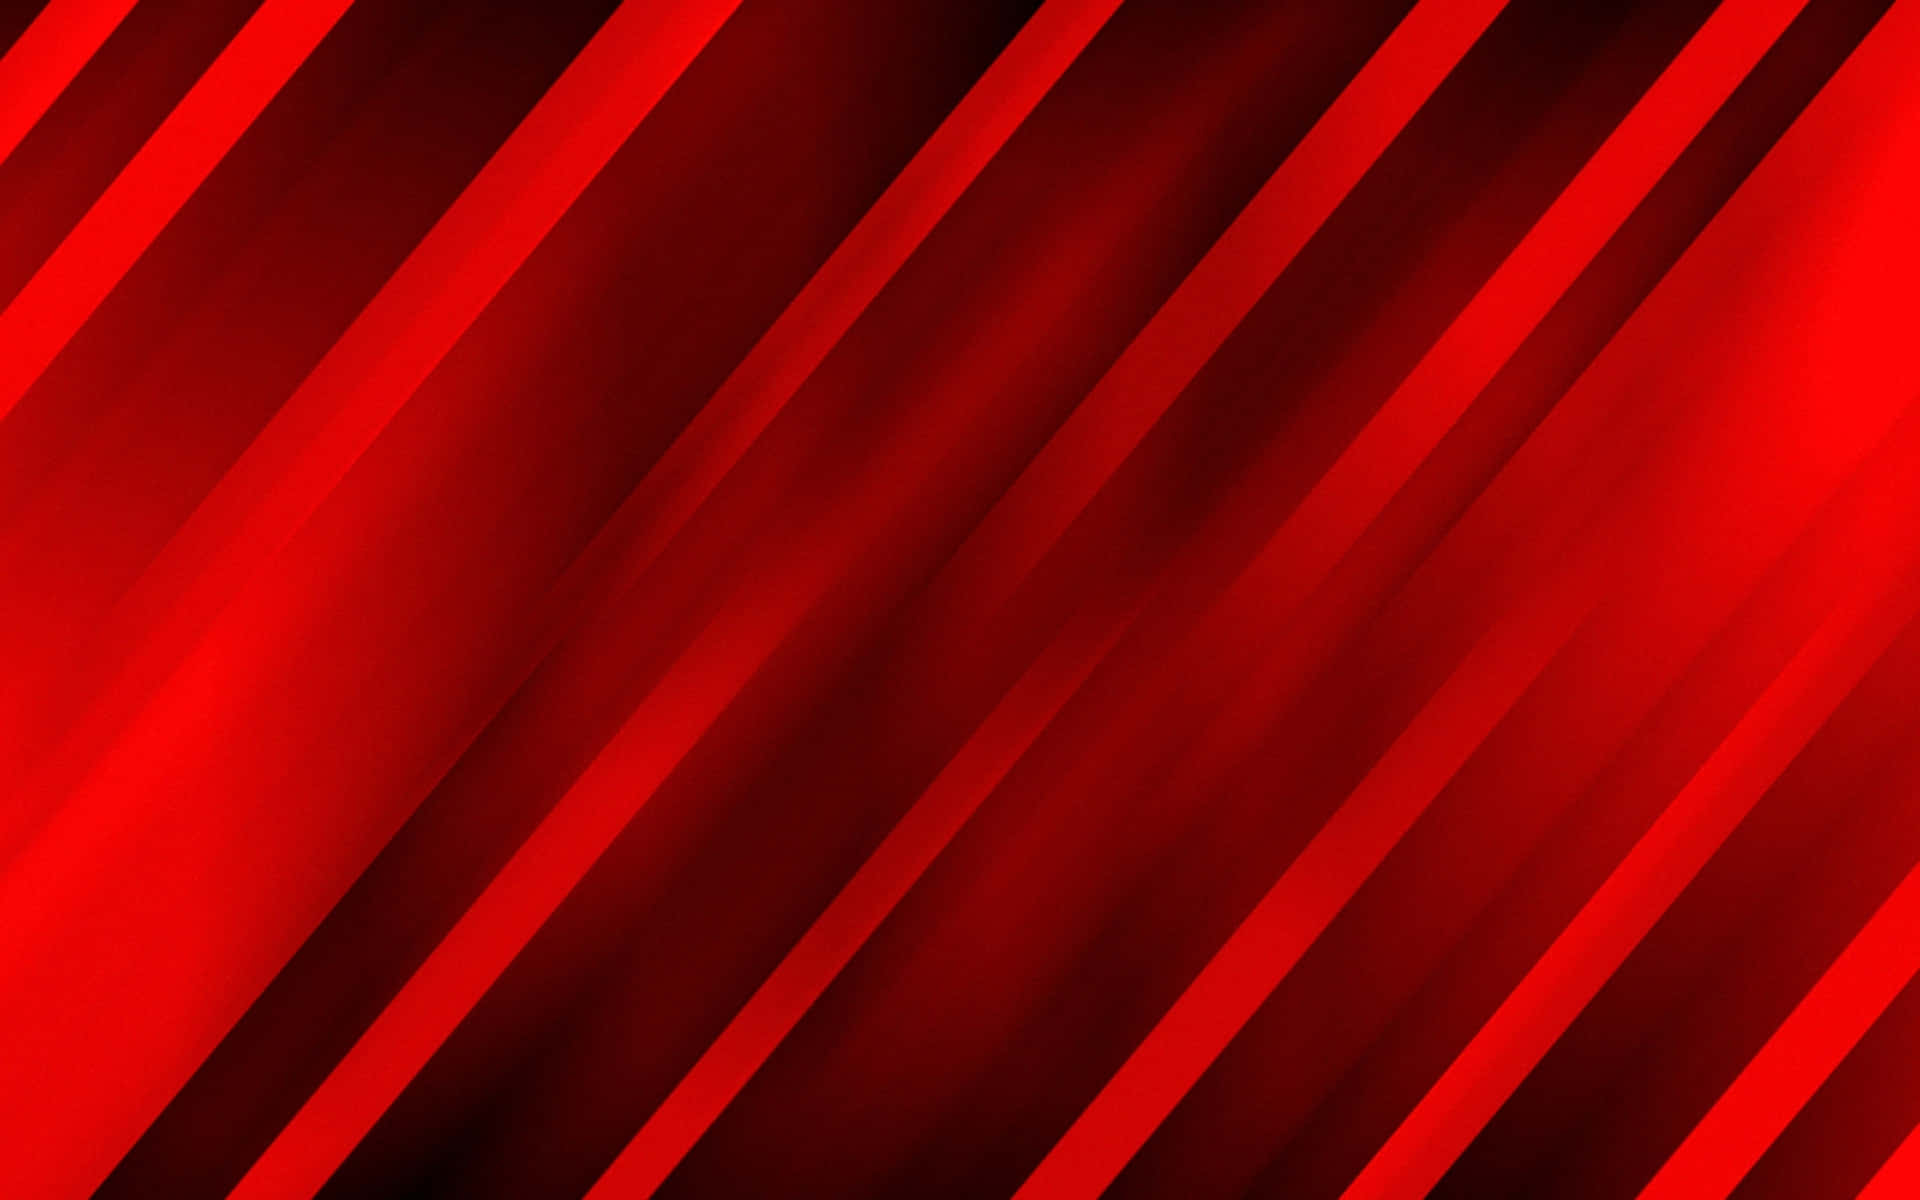 Follow the "Red Line" Wallpaper